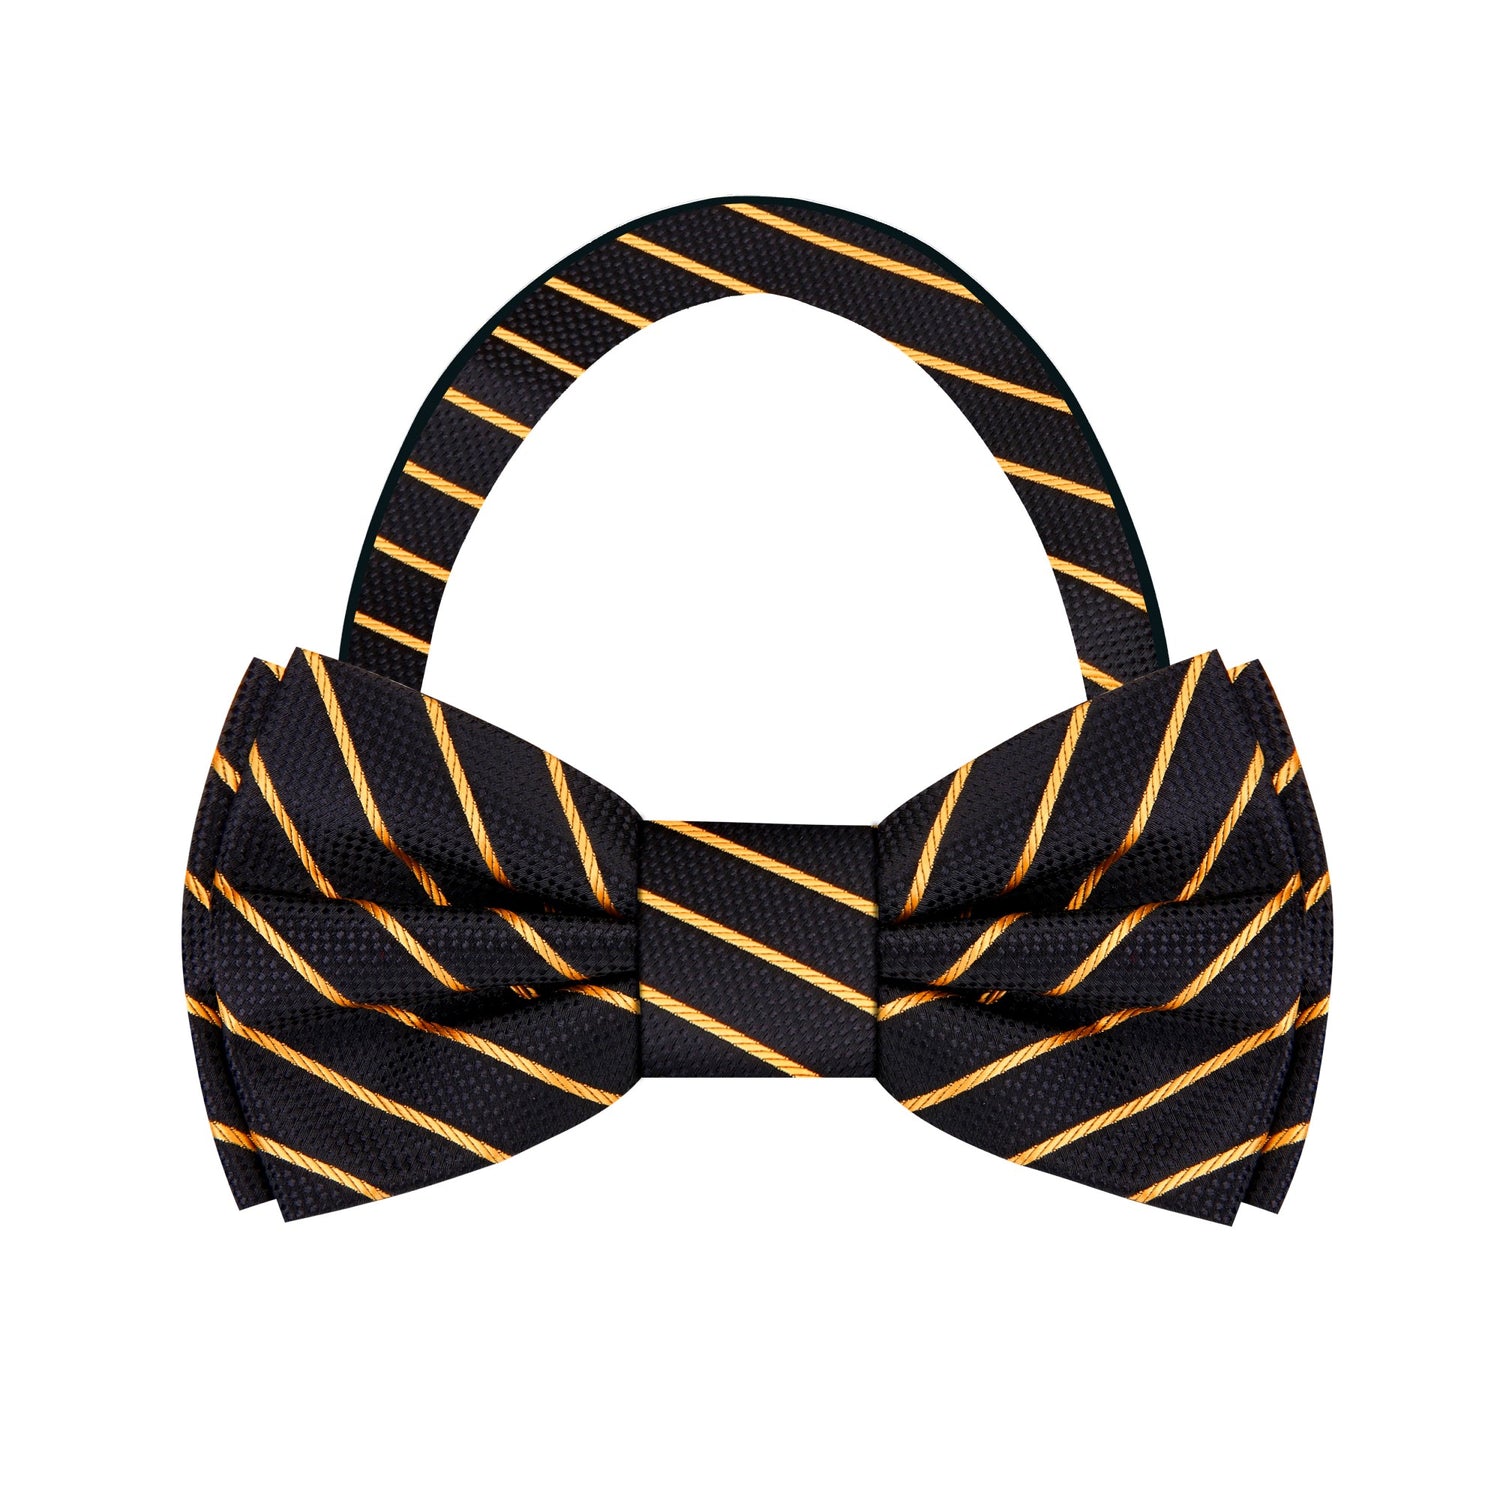 Black and Gold Stripe Bow Tie Pre Tied